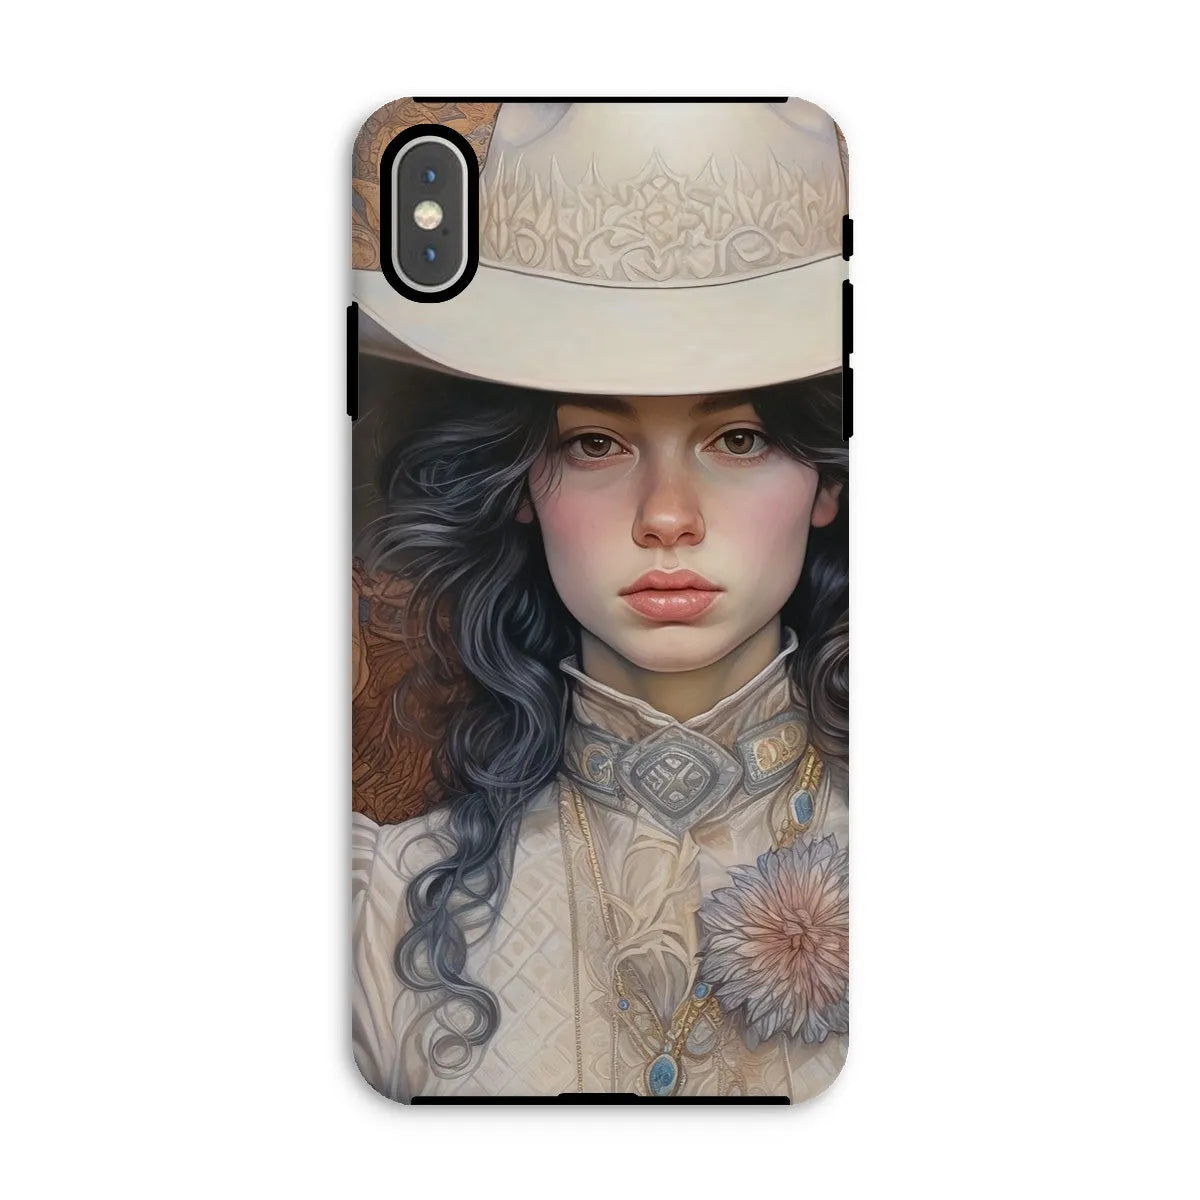 Helena The Lesbian Cowgirl - Sapphic Art Phone Case - Iphone Xs Max / Matte - Mobile Phone Cases - Aesthetic Art